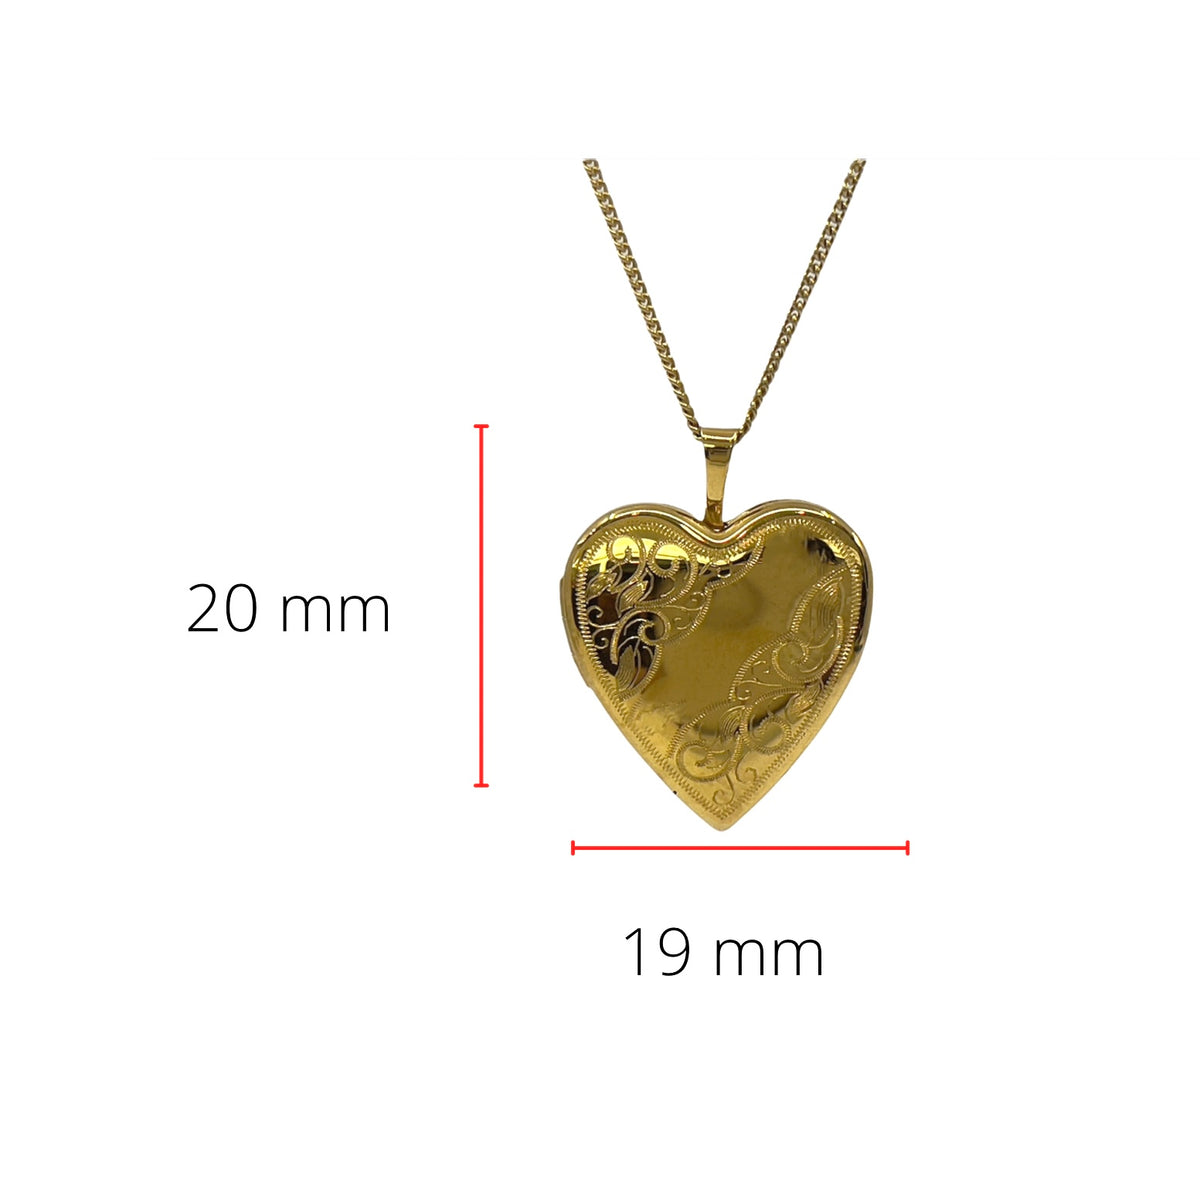 Gold Plated on 925 Sterling Silver Heart Shaped Locket with Filigree Design - 21mm x 20mm